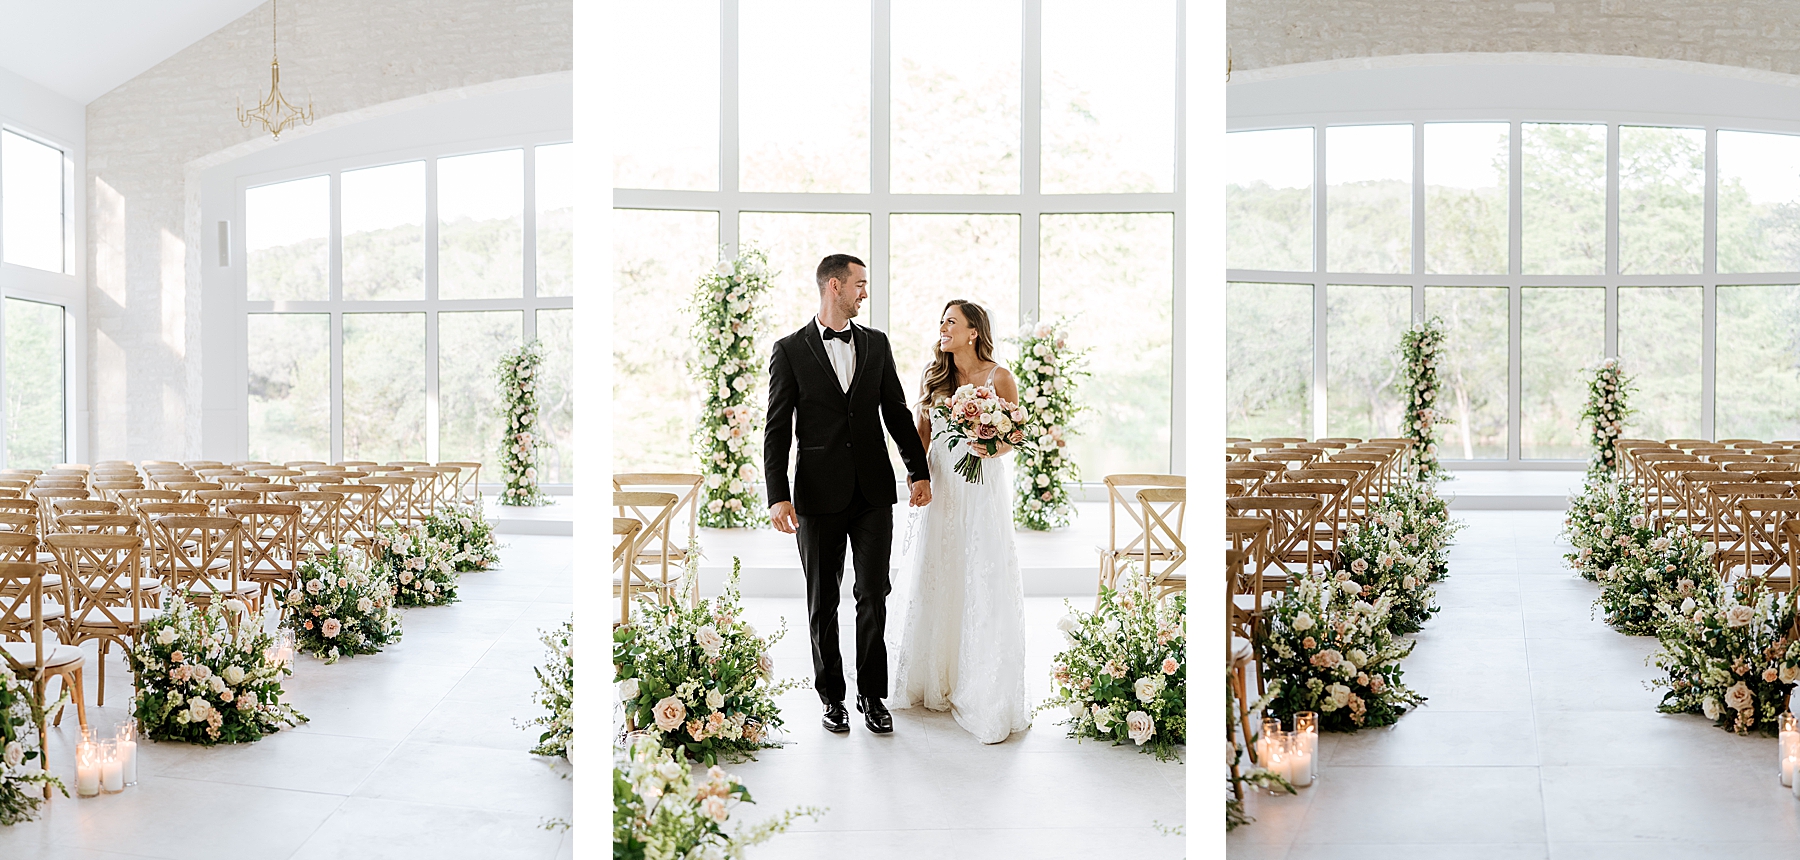 Couple walking down the aisle at Texas Hill Country wedding chapel | Reiley and Rose | Central Texas Wedding Floral Designer | The Preserve at Canyon Lake Wedding Venue | classic wedding inspiration, chic wedding, pink wedding color scheme | via reileyandrose.com